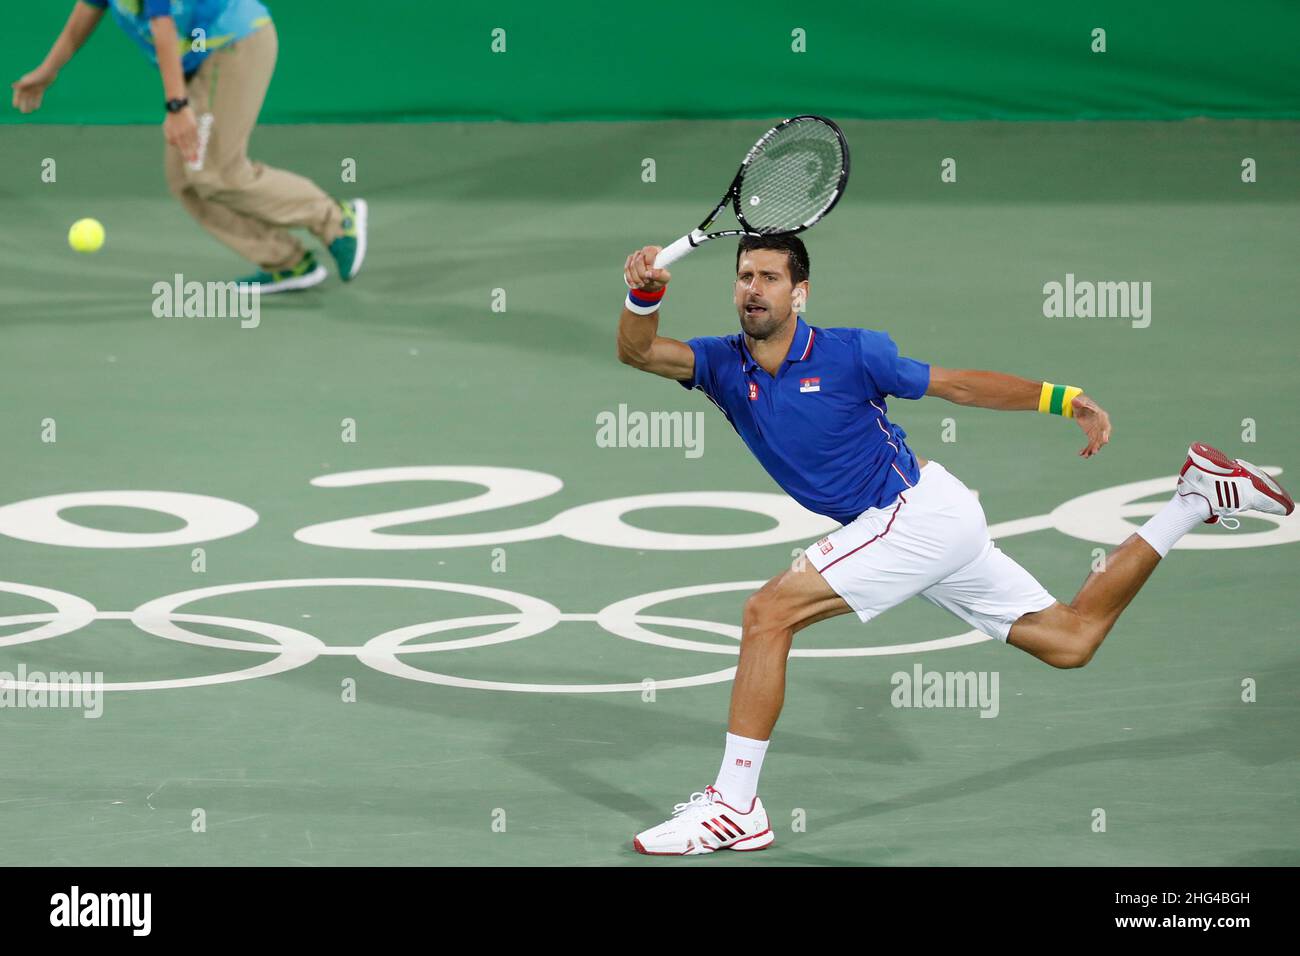 Novak Djokovic tennis player from Serbia competes on court at the Rio